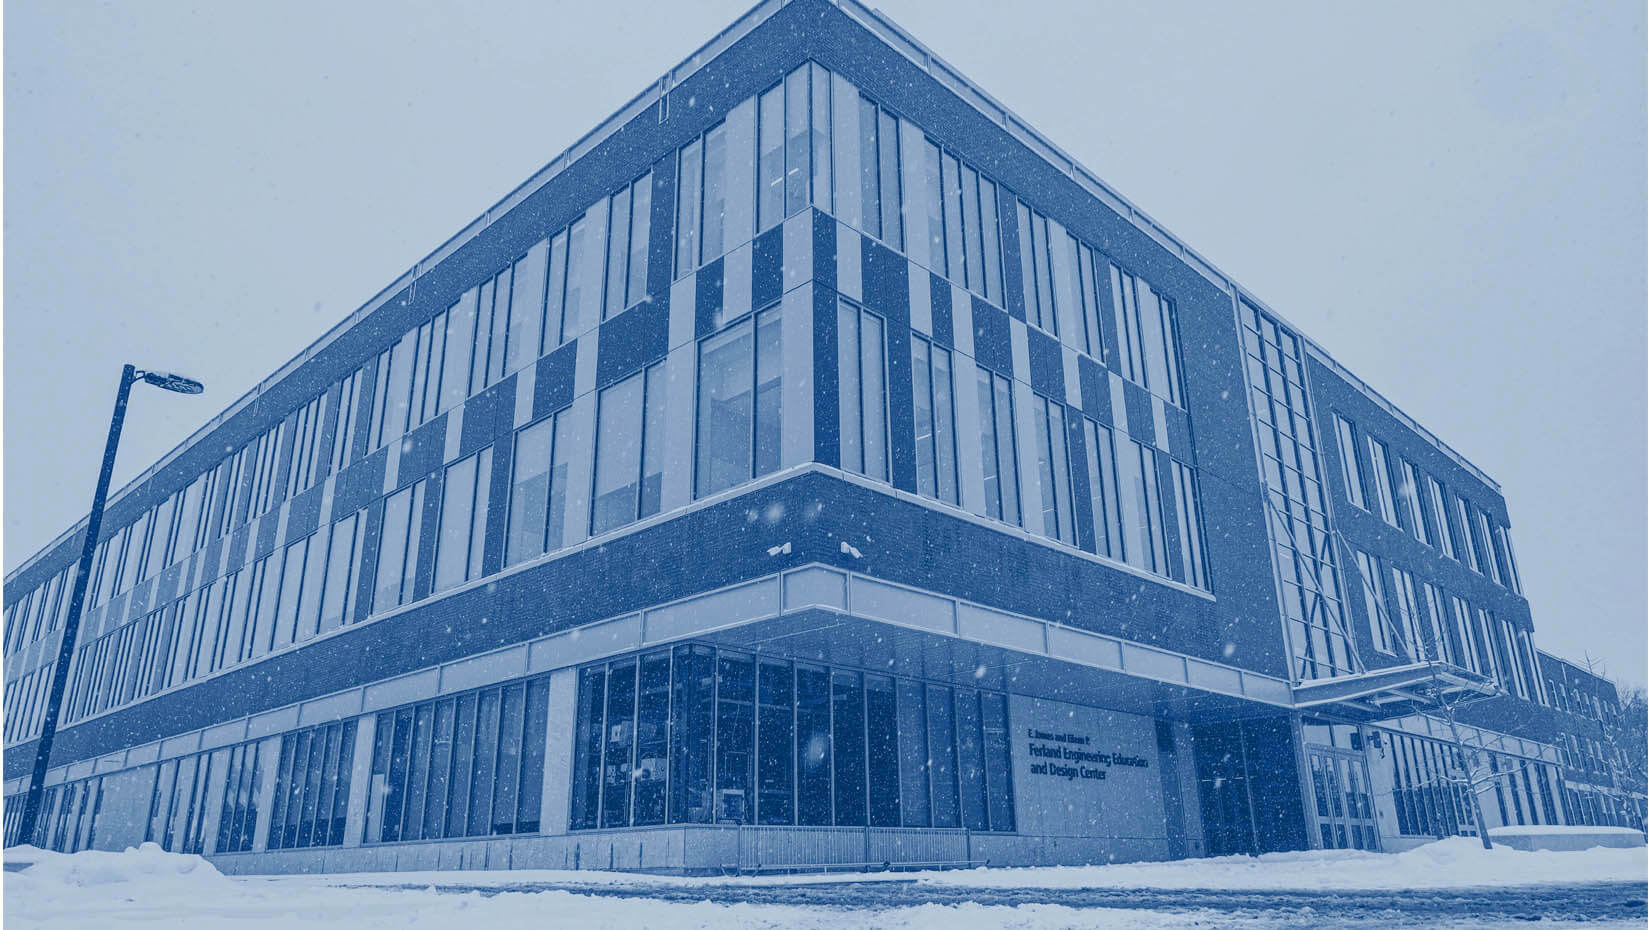 A photo of UMaine's Ferland Engineering Education and Design Center in winter